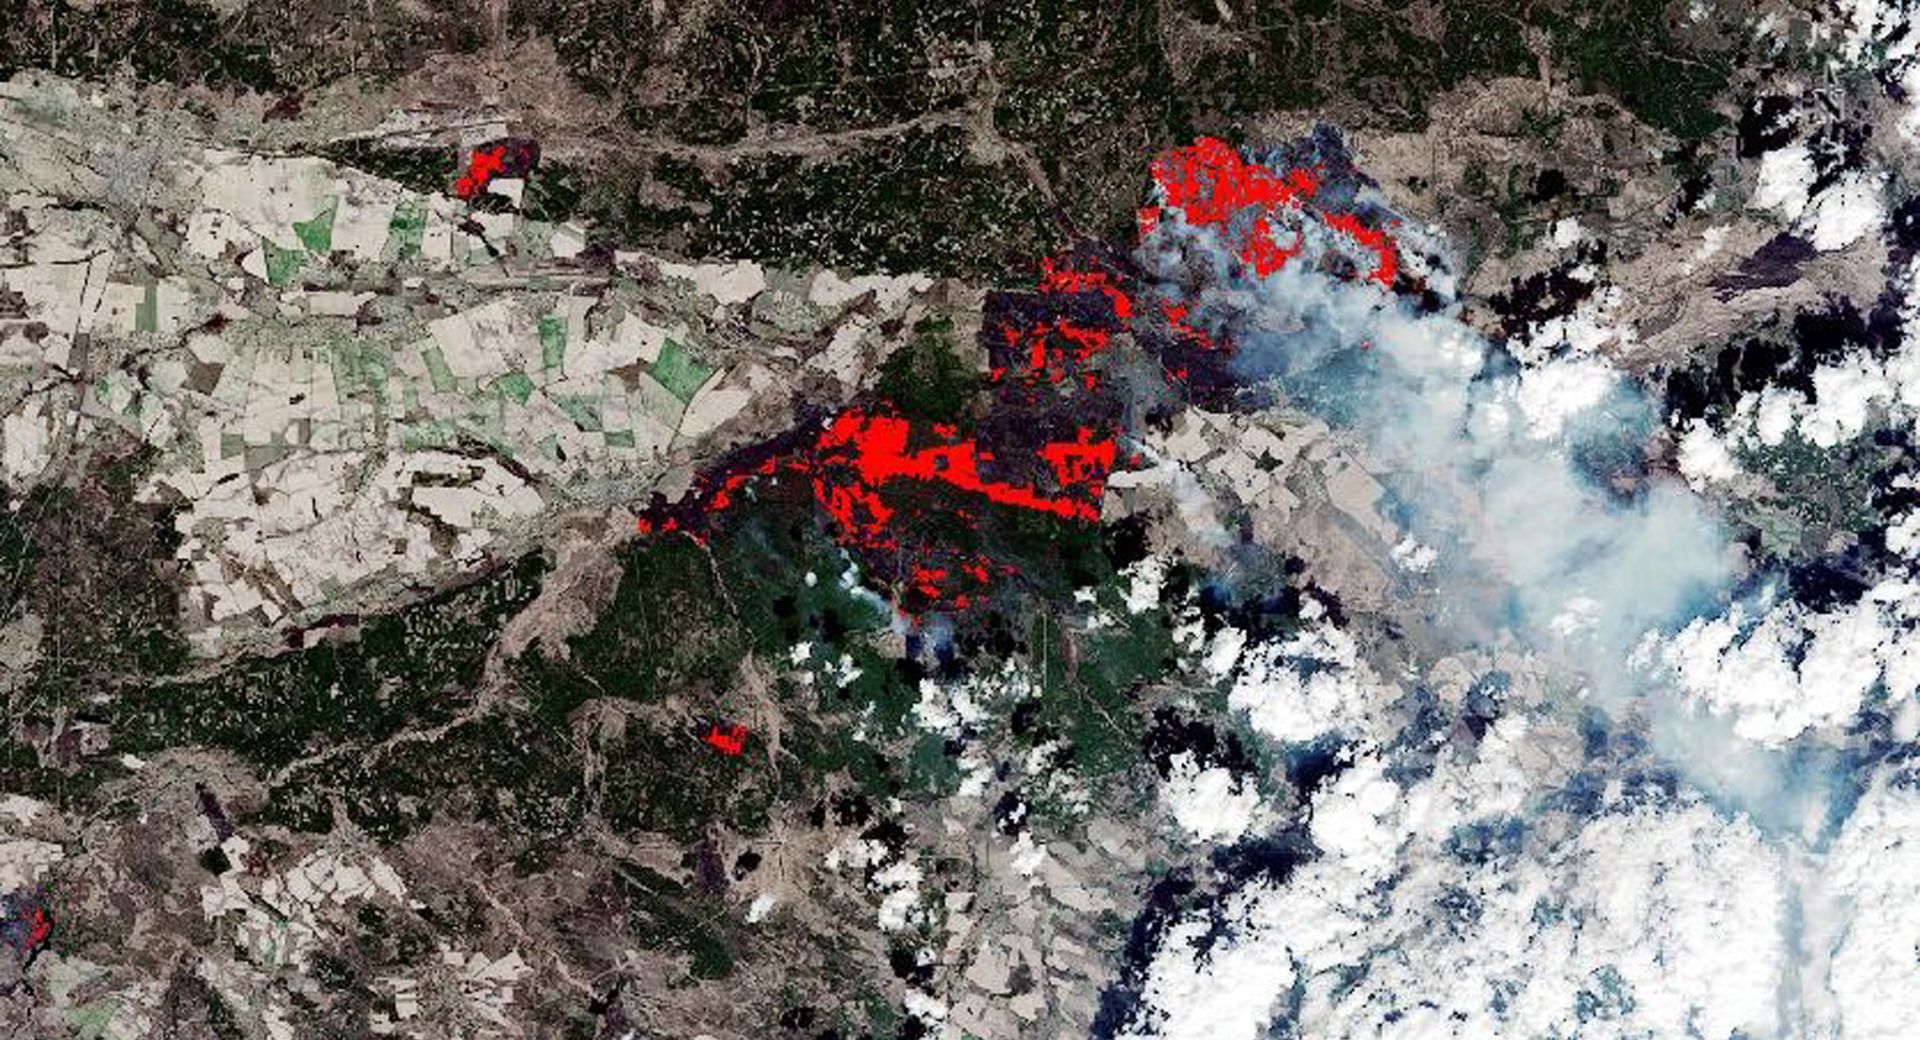 epa08369404 A handout picture made available by the European Space Agency (ESA) shows the burned area around Chernobyl, Ukraine, 10 April 2020, following an outbreak of wildfires (issued 17 April 2020). This extract of a burned area mapping product was generated by CIMA Foundation and Fadeout using the WASDI processing environment. It is based on images acquired by Copernicus Sentinel-2 on 26 March and 10 April 2020.  EPA/ESA HANDOUT -- contains Copernicus Sentinel data (2020), processed by CIMA Foundation and Fadeout srl -- HANDOUT EDITORIAL USE ONLY/NO SALES